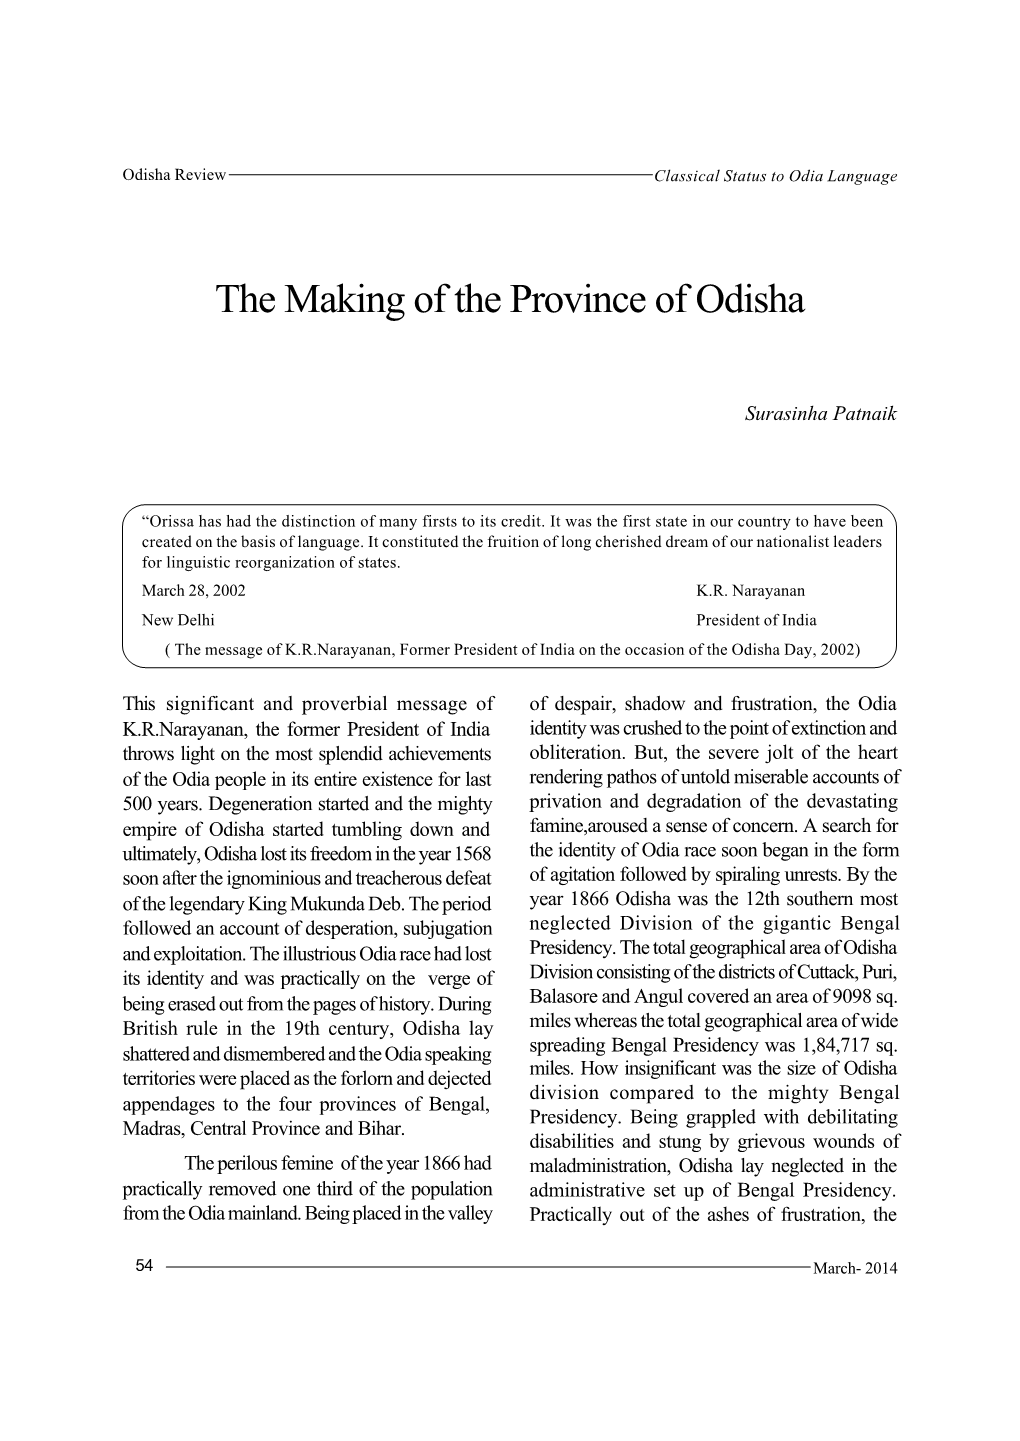 The Making of the Province of Odisha